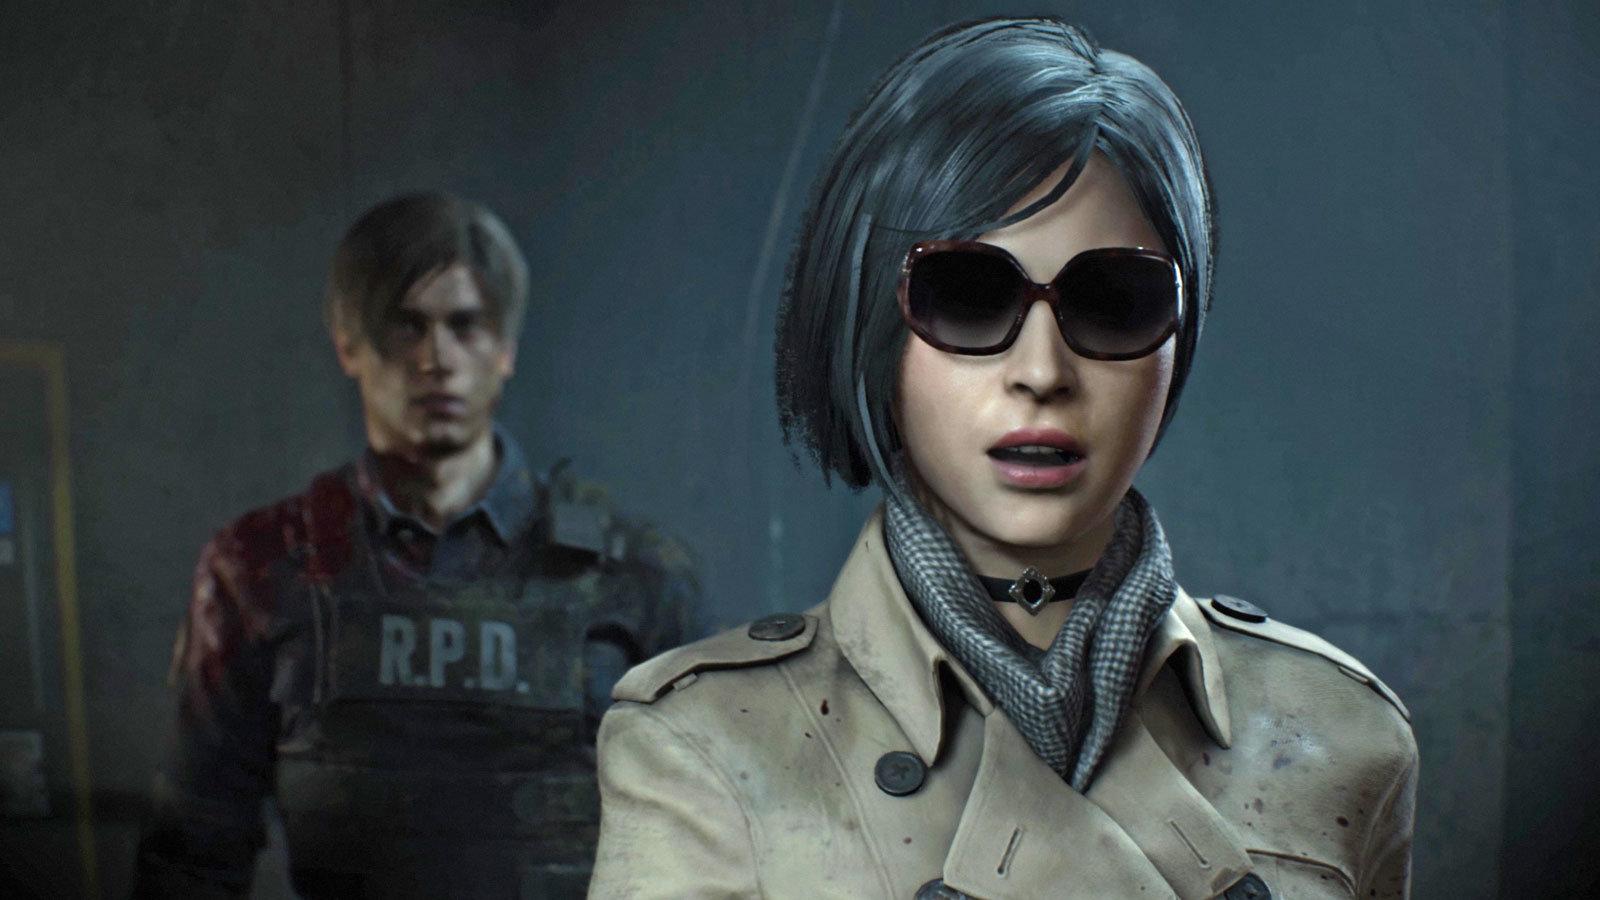 Resident Evil 2' remake's Story trailer features familiar faces